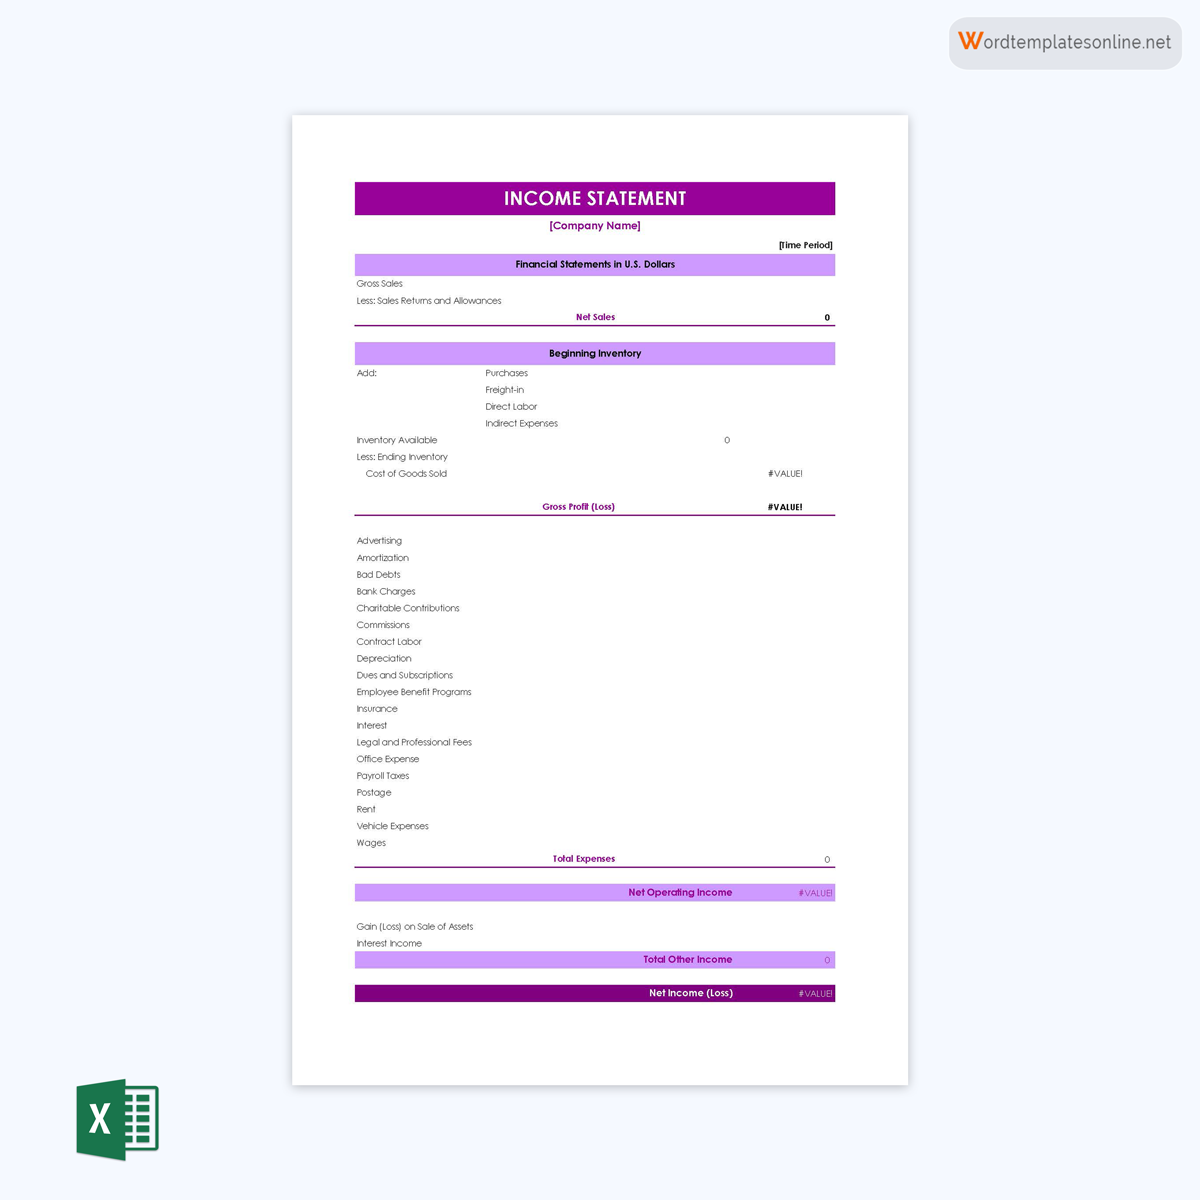 Great Customizable General Income Statement Sample 04 as Excel Sheet